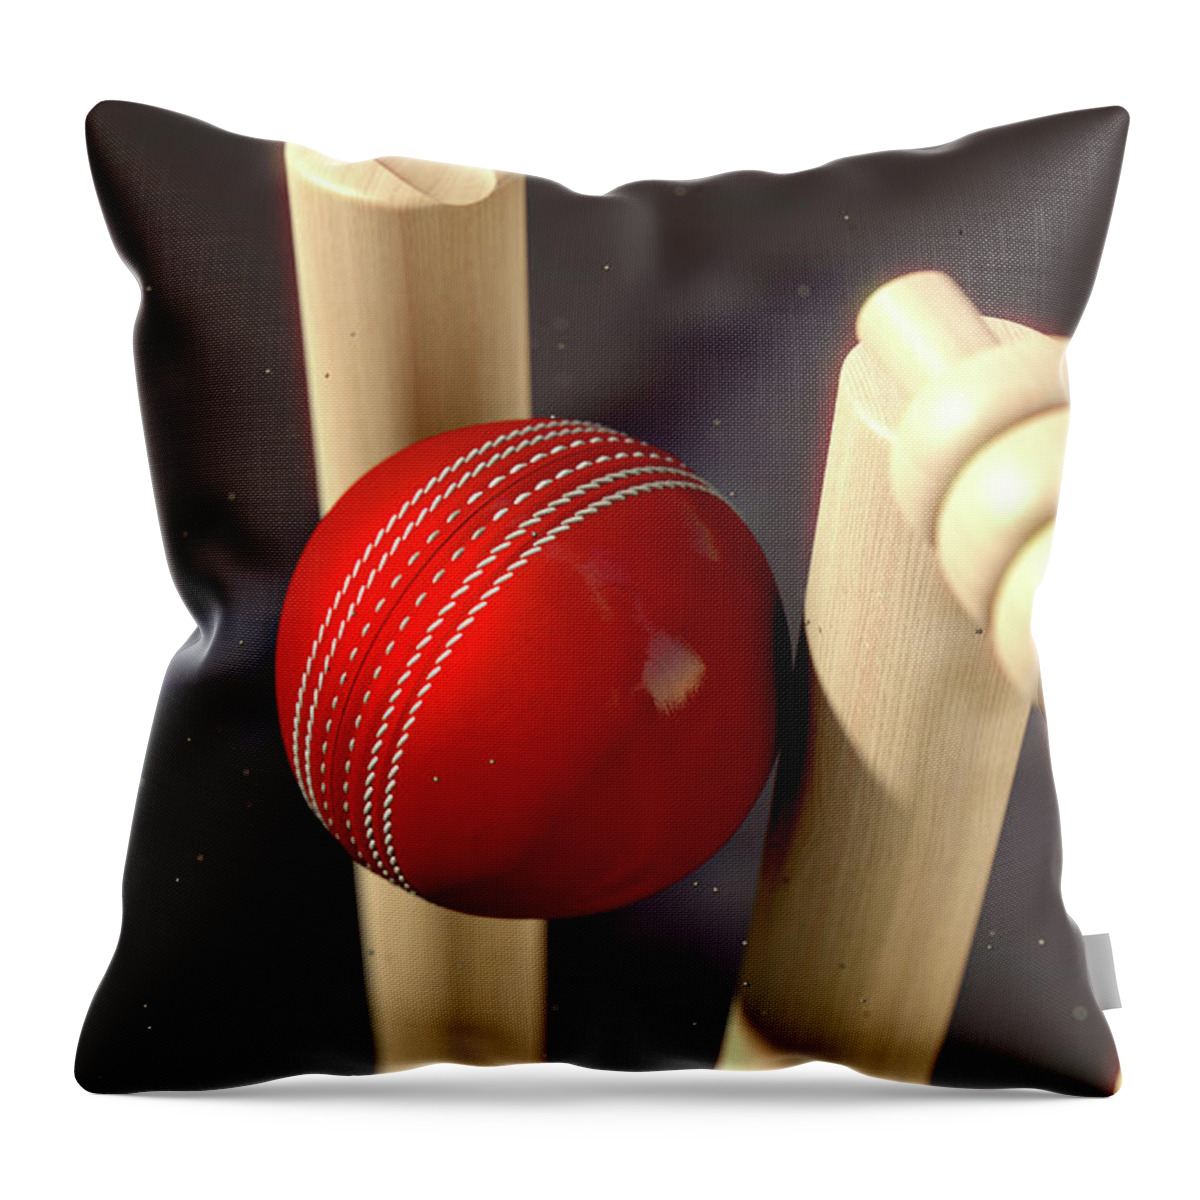 Action Throw Pillow featuring the digital art Cricket Ball Hitting Wickets #10 by Allan Swart